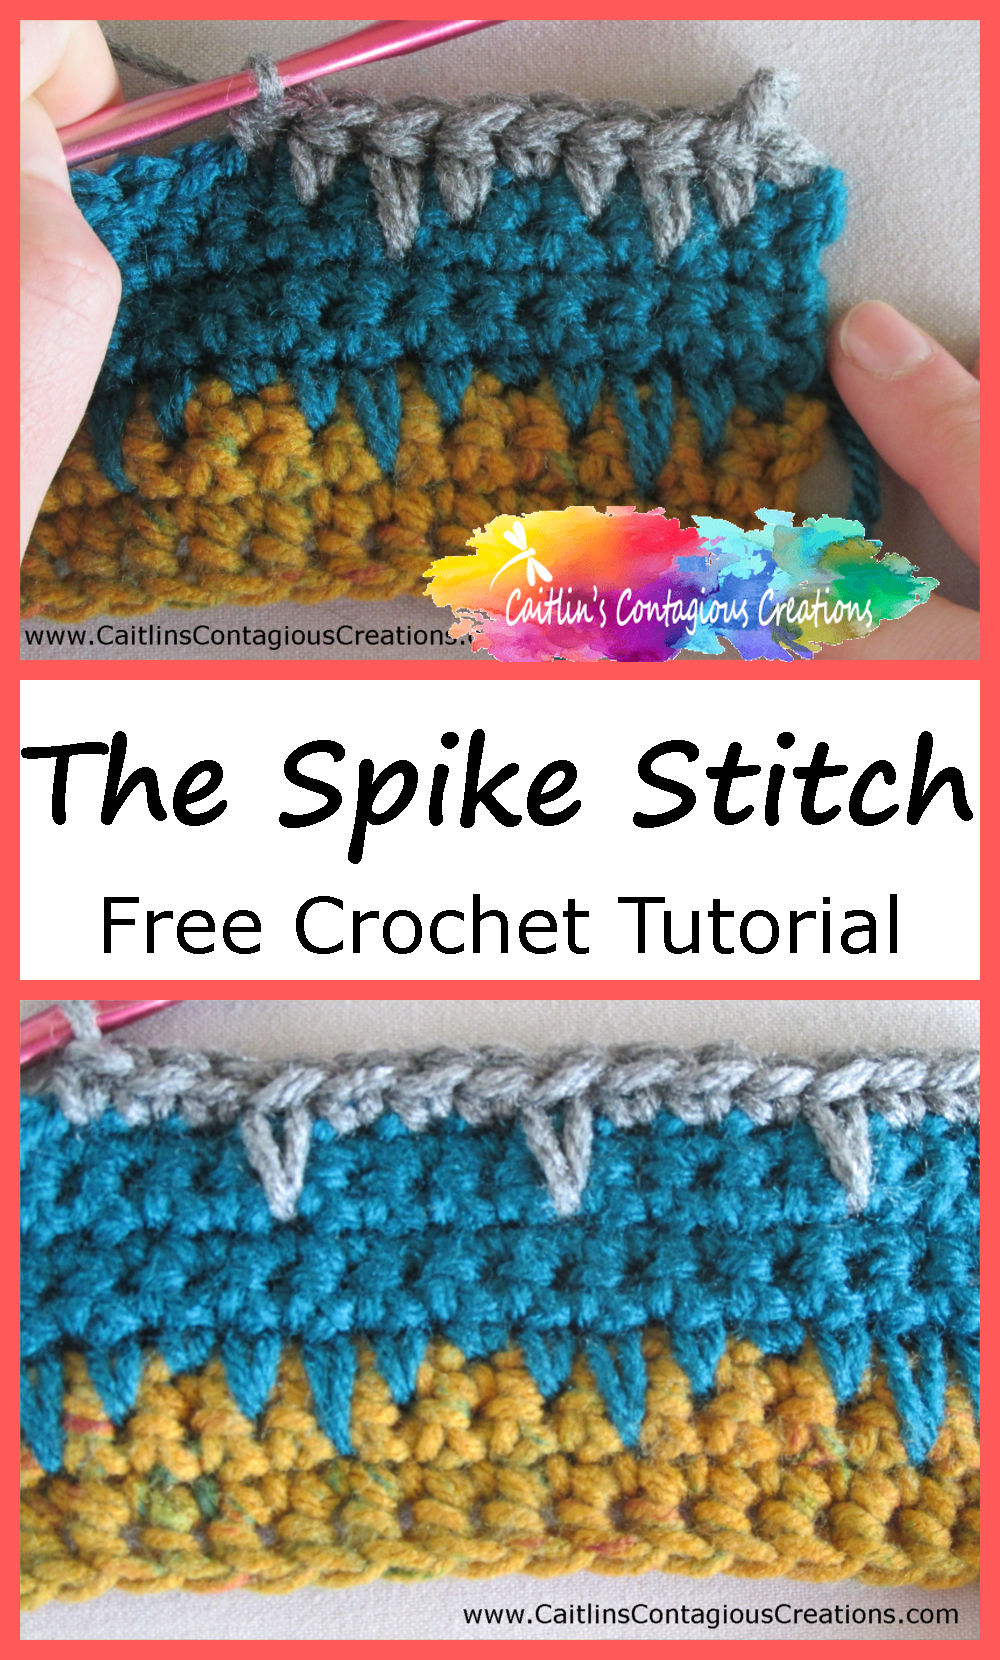 Free Spike Stitch Crochet Tutorial from Caitlin's Contagious Creations. An easy to follow how to lesson teaching the single crochet, half double crochet, and double crochet spike stitch variations. It's like 3 lessons in 1! This easy crochet stitch guide is a great way for beginners to move past basic stitches and learn a fun, new crochet stitch! #FreeCrochetTutorial #PhotoCrochetTutorial #EasyCrochetStitch